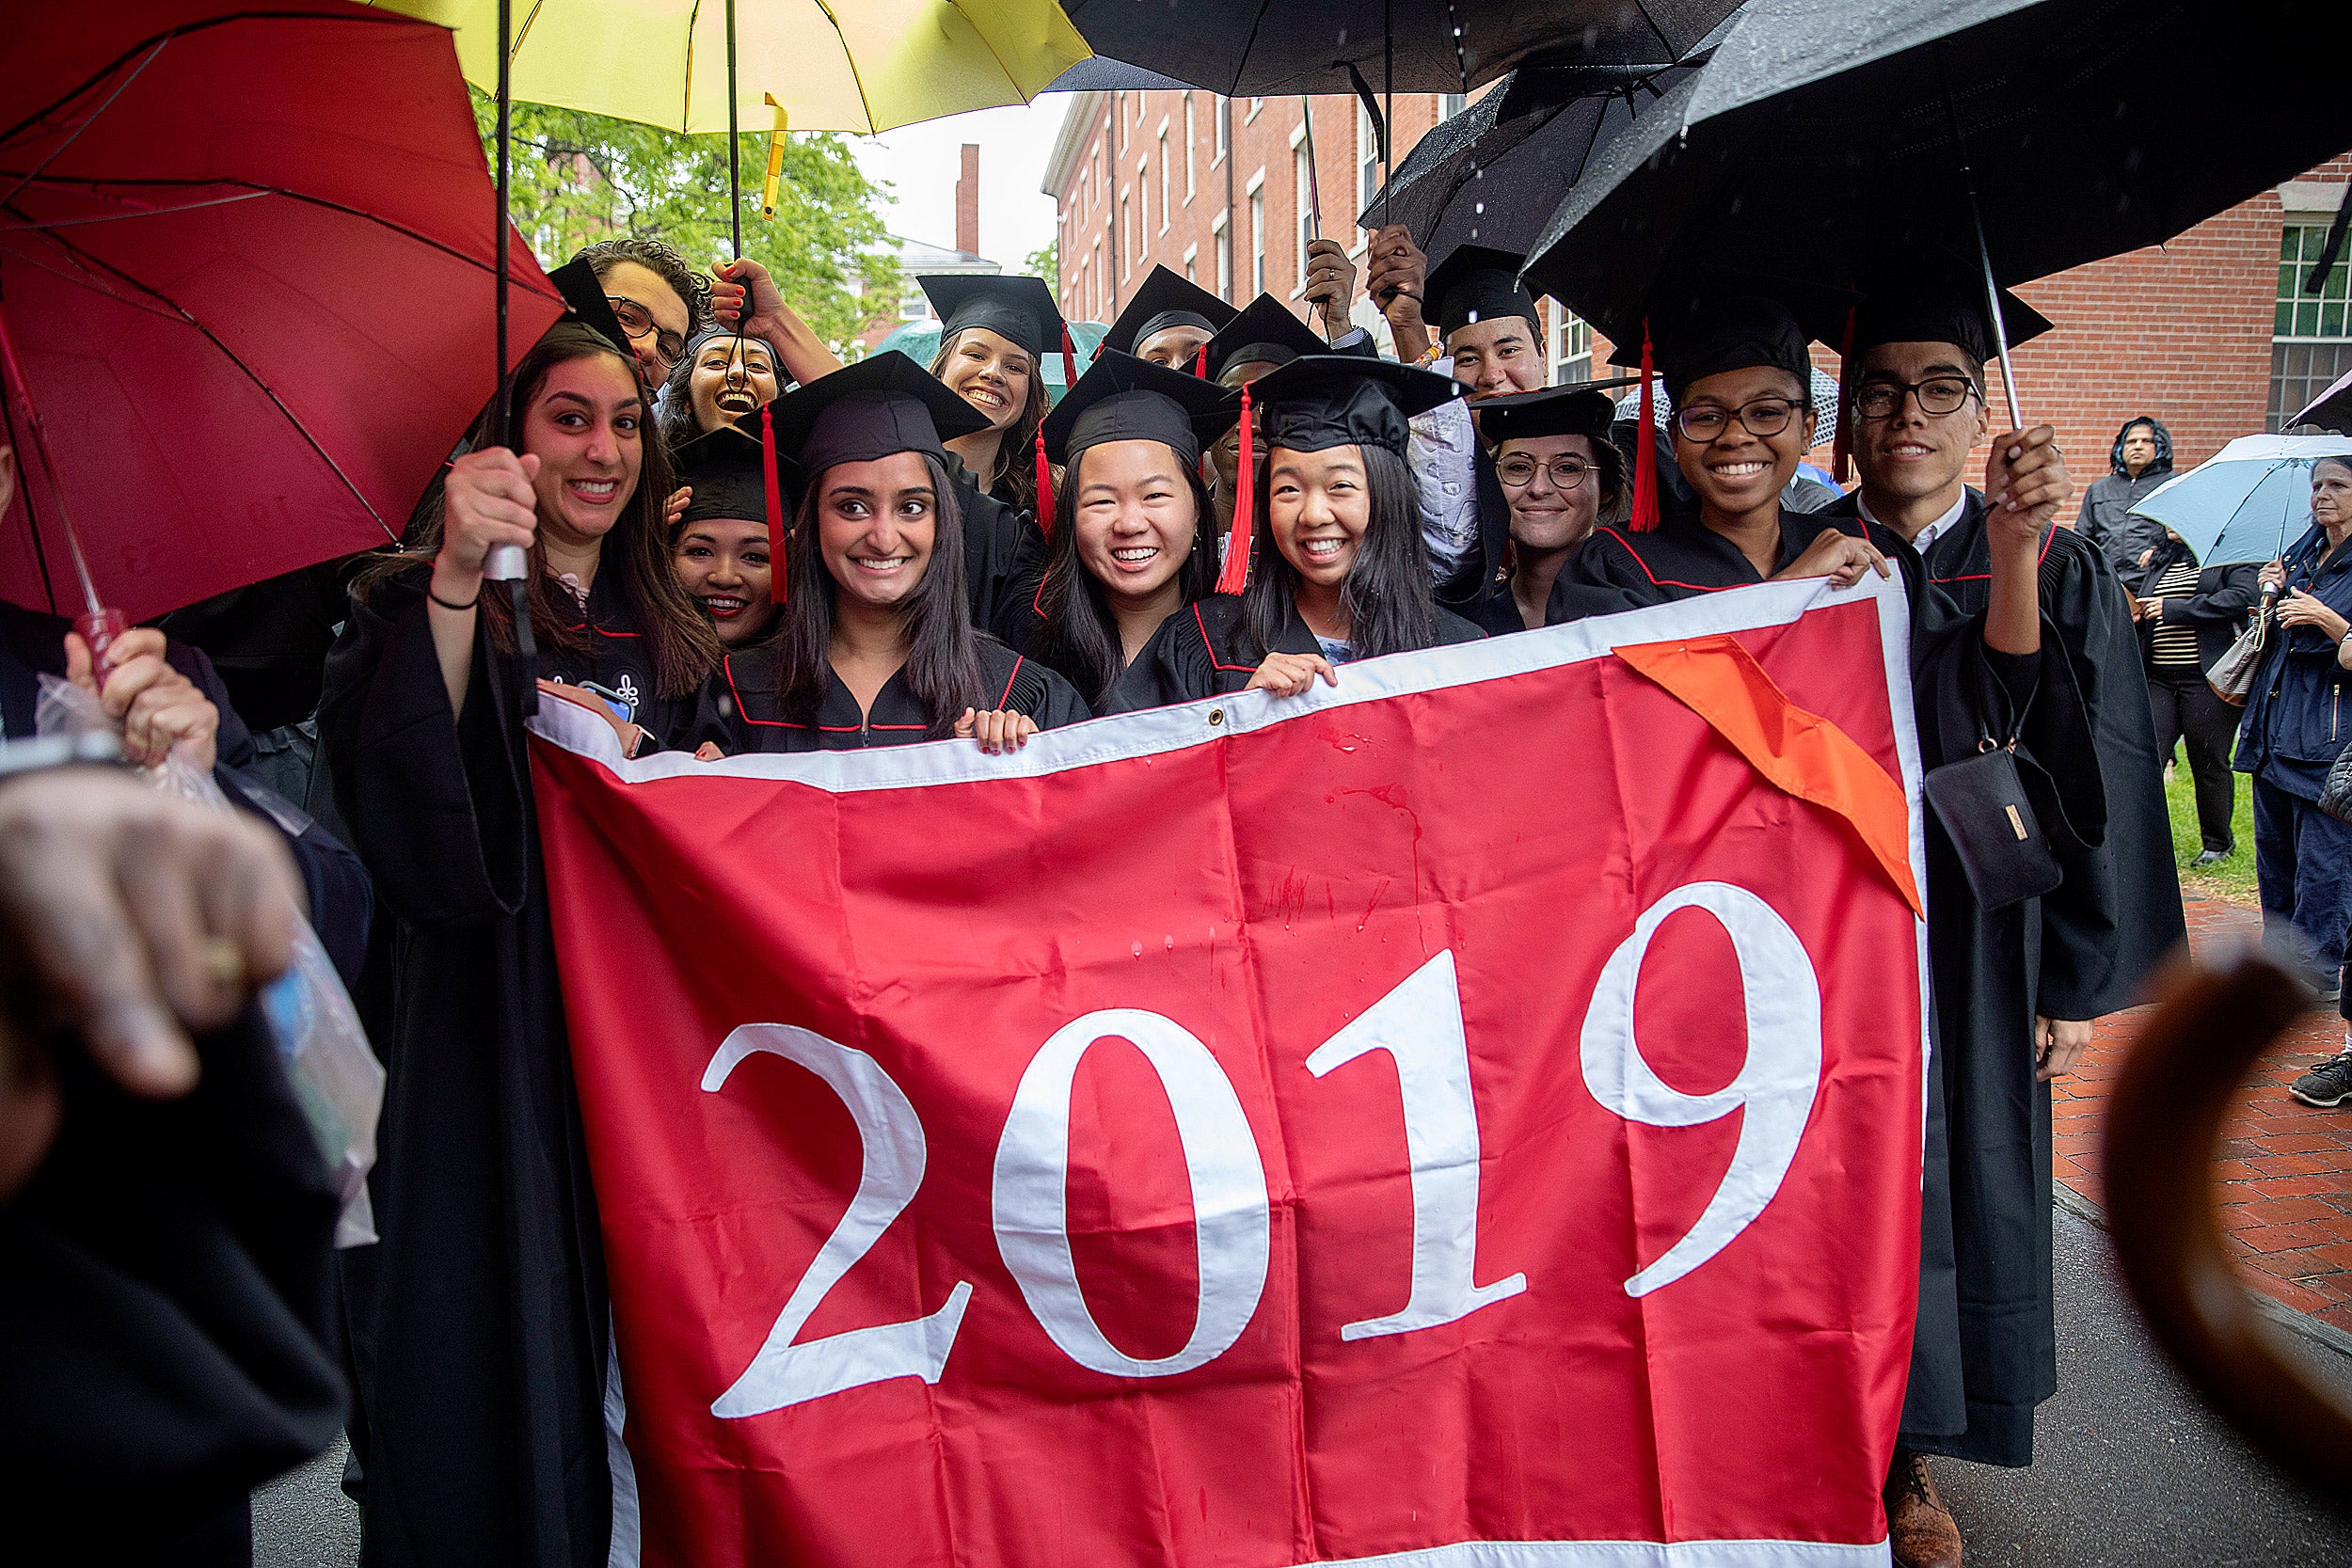 The Baccalaureate procession marches toward Memorial Church holding a 2019 banner and umbrellas.